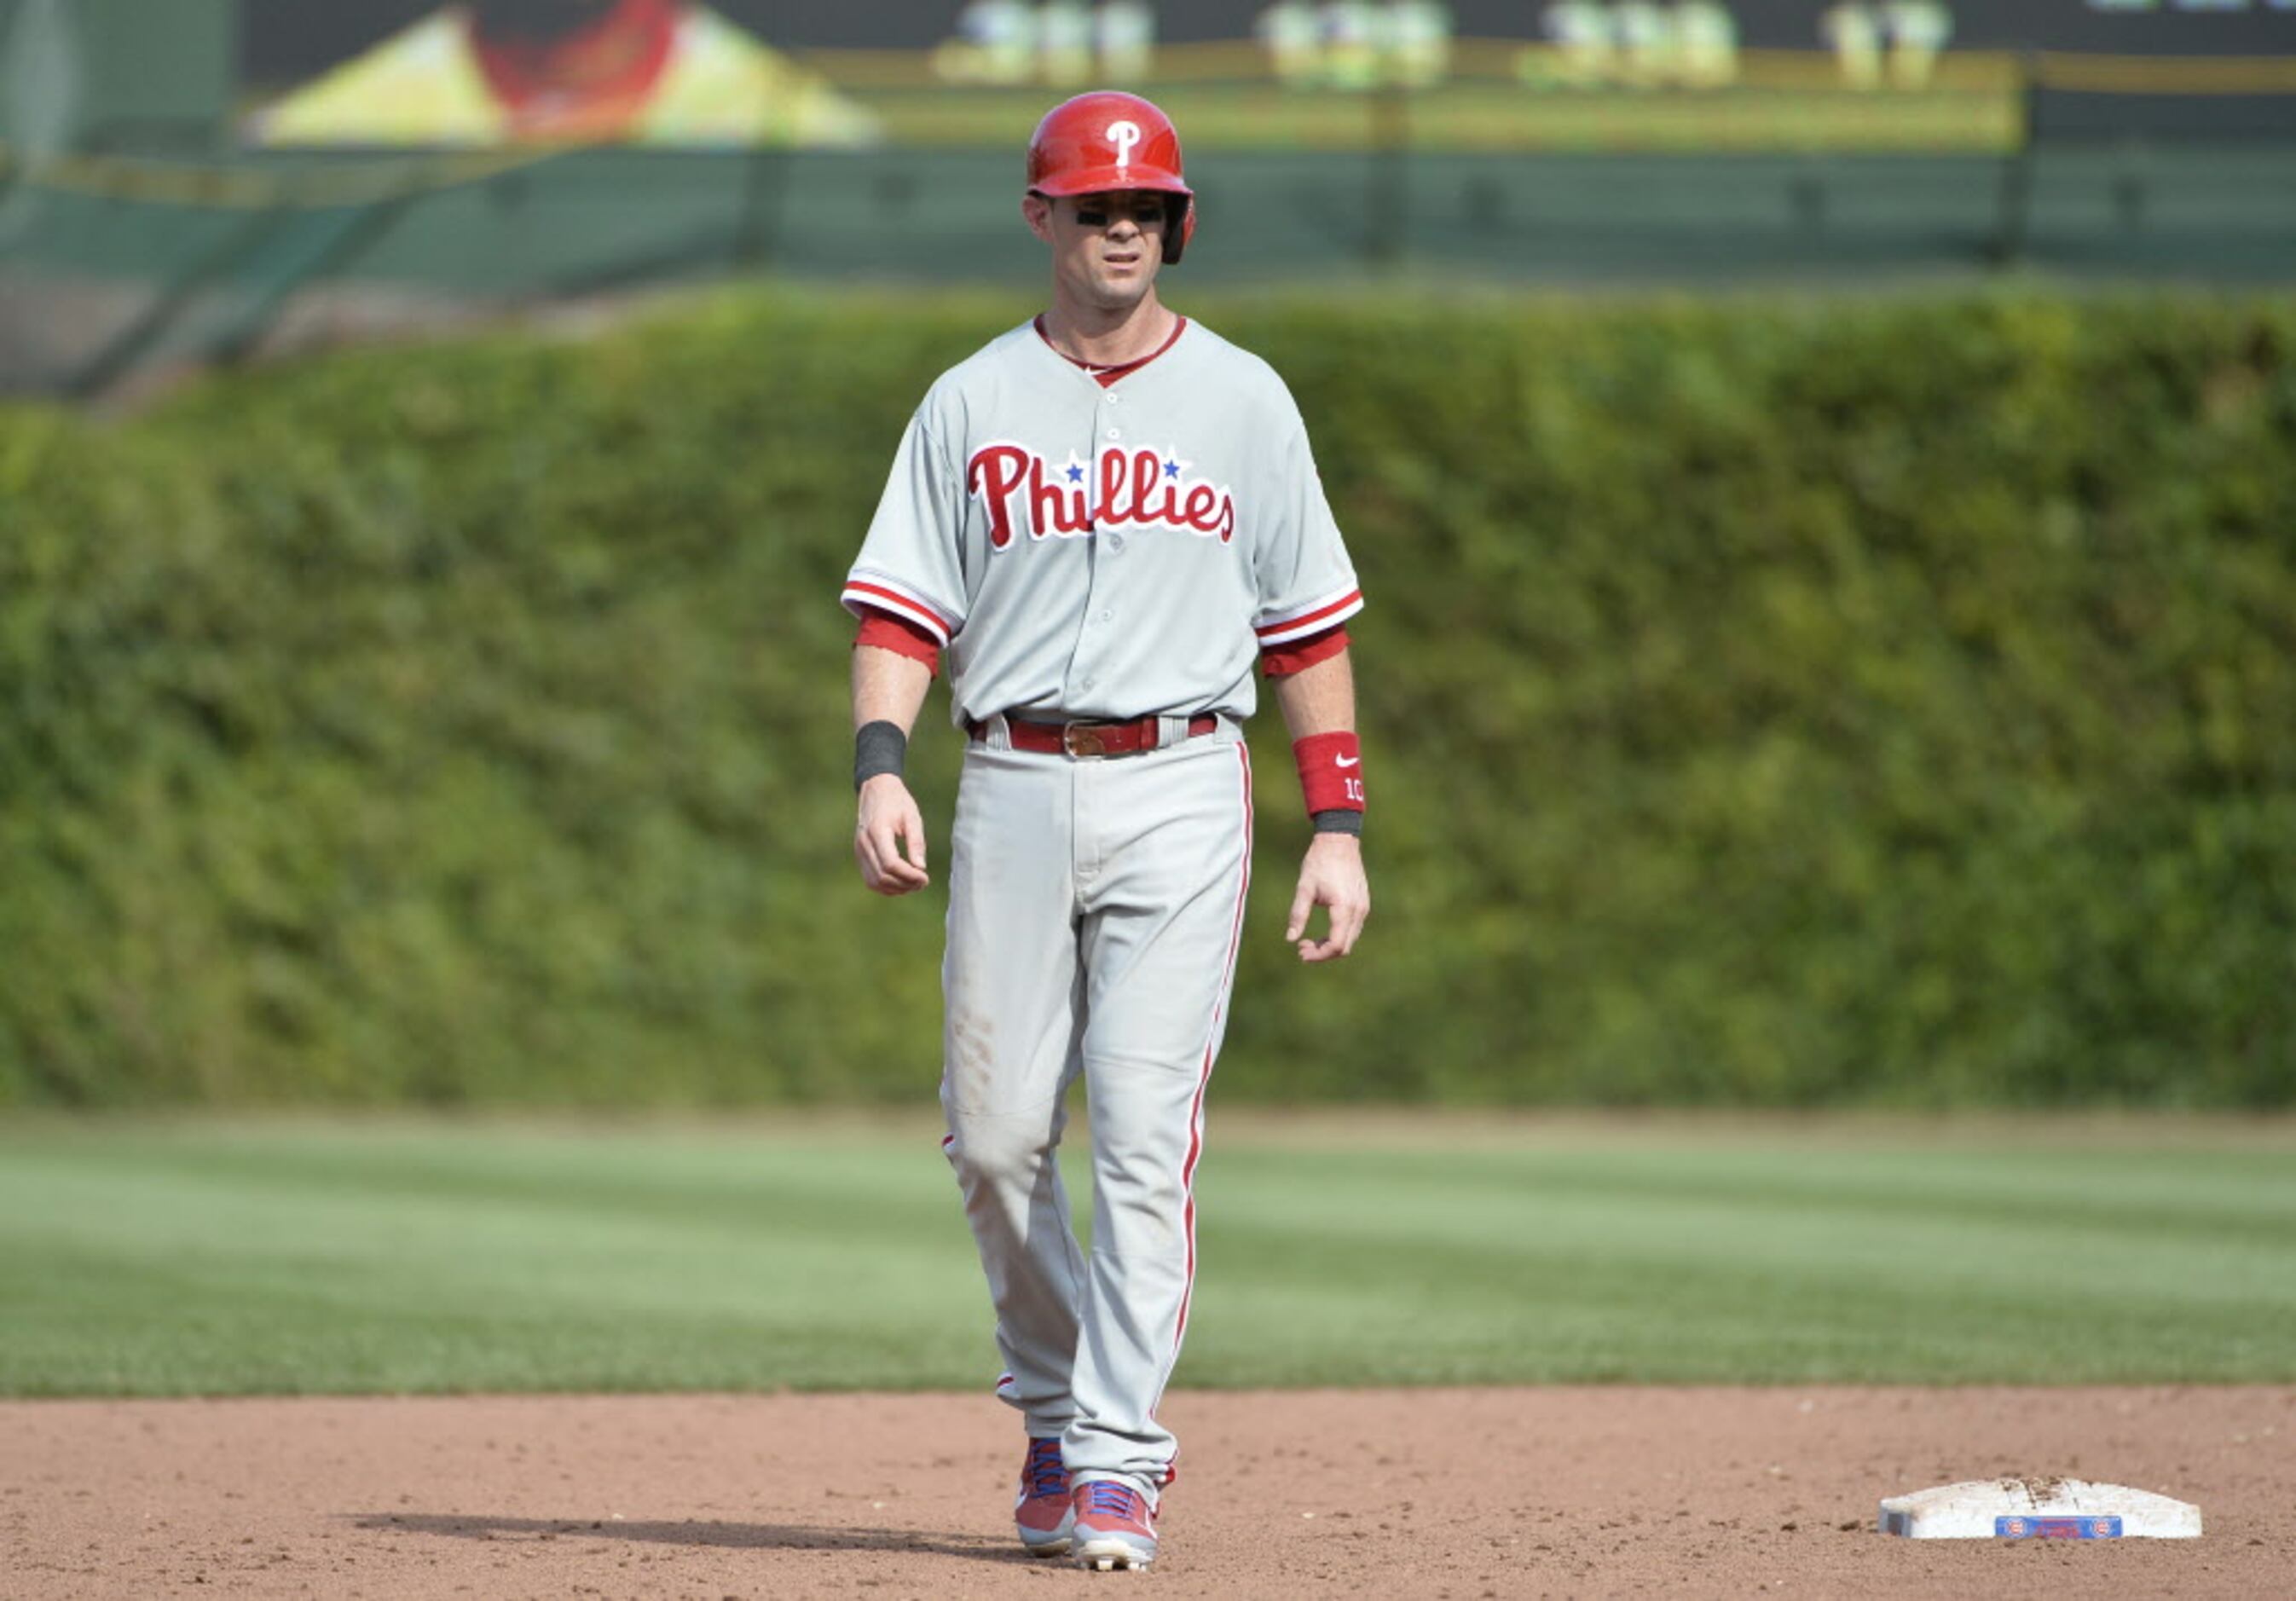 Texas Rangers send veteran Michael Young to Phillies for pitchers